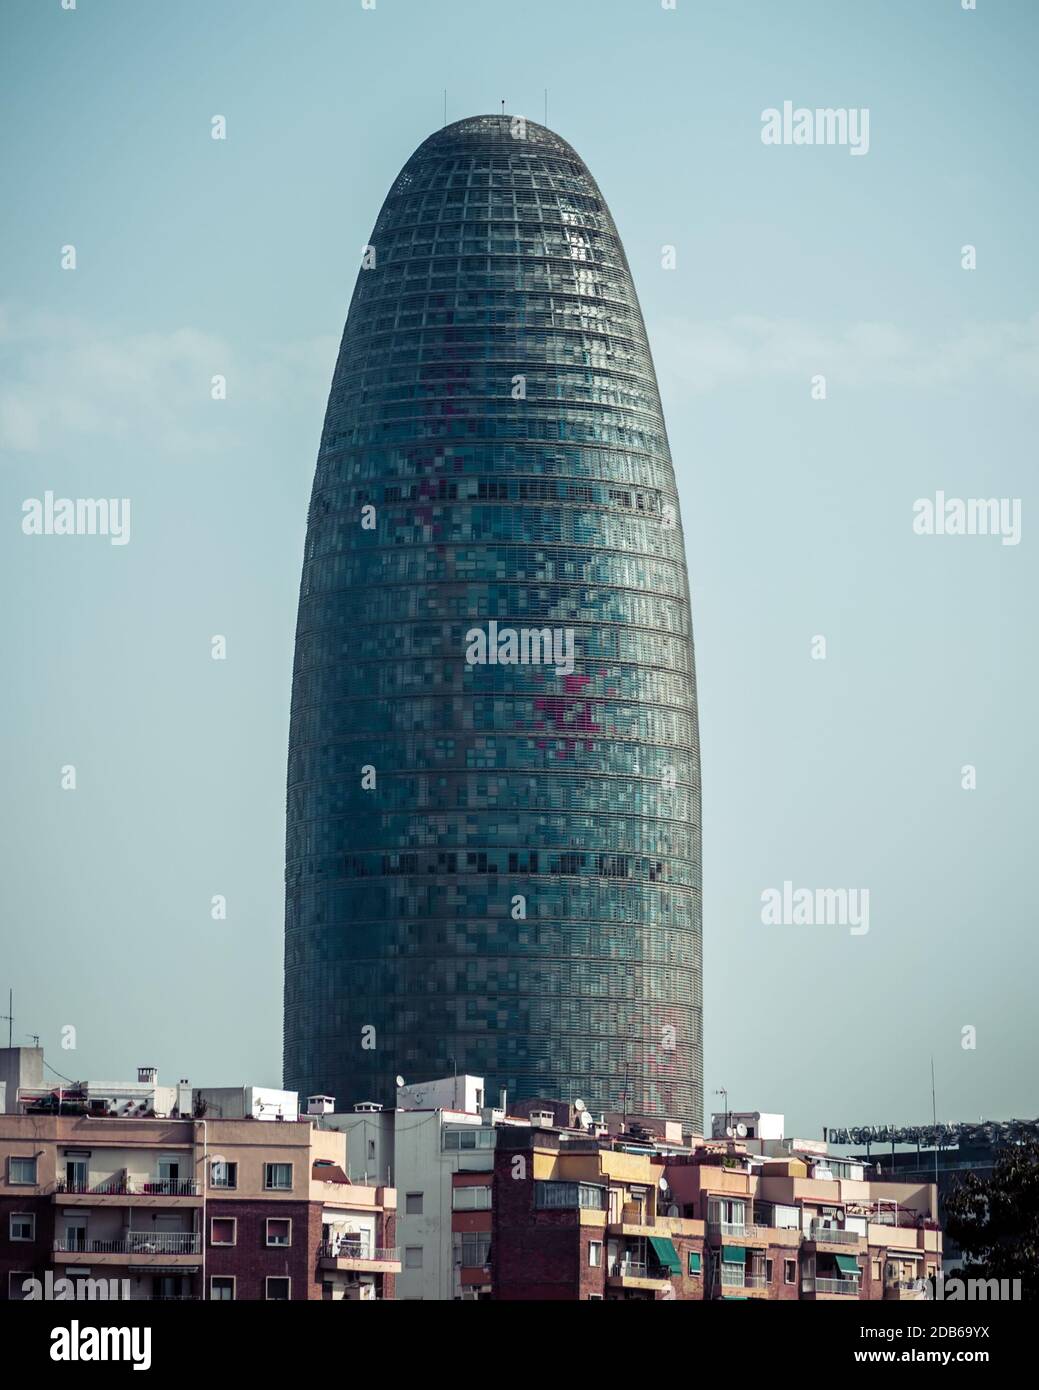 BARCELONA - AUGUST 24: Torre Agbar on Technological District on August 24, 2012 in Barcelona, Spain. This 38-storey tower was designed by the famous a Stock Photo